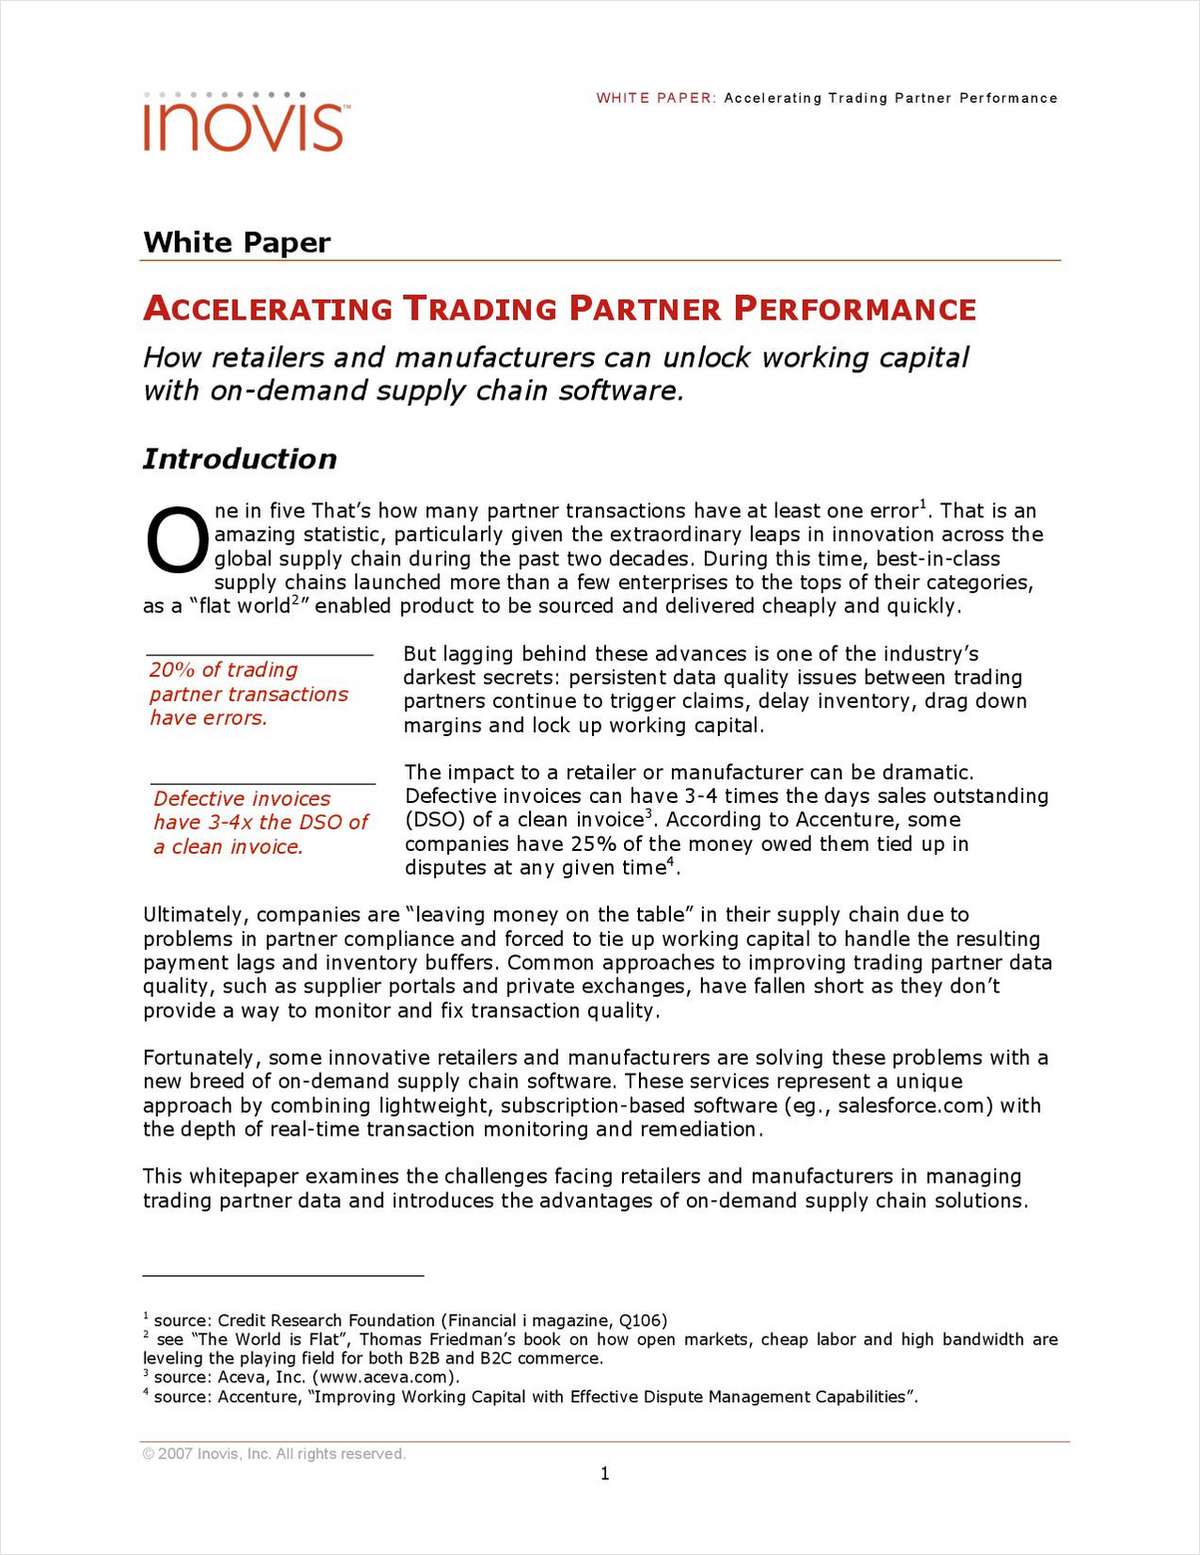 Accelerating Trading Partner Performance: How Retailers and Manufacturers can Unlock Working Capital with on-demand Supply Chain Software